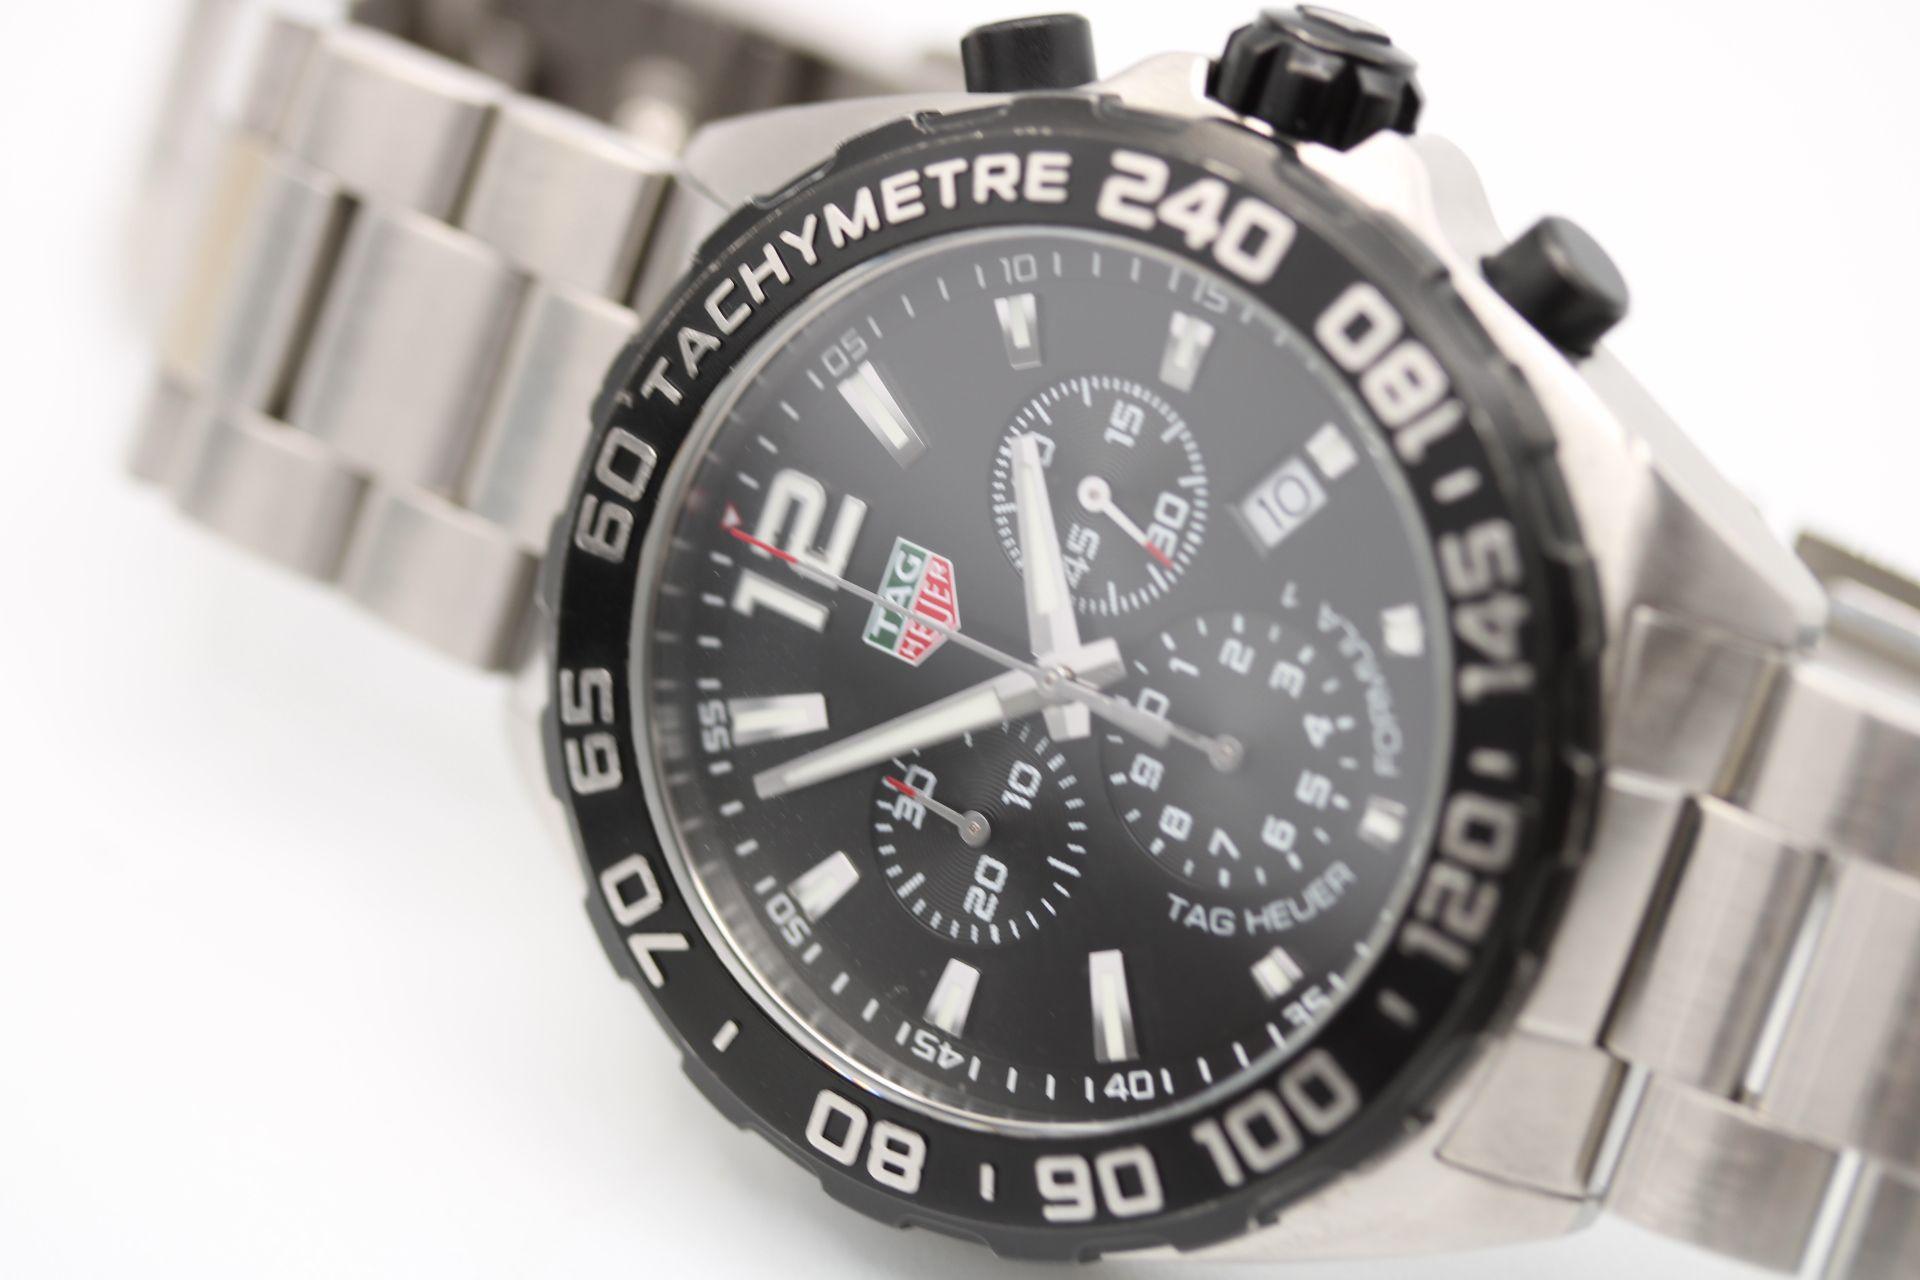 Watch: Tag Heuer Formula 1 CAZ1010 Full Set 2018
Stock Number: CHW5040
Price: £1,150.00

The signature Chronograph Formula 1 watch presented by Tag Heuer, model CAZ1010, is presented as complete full set dated April 2018 as well as in perfect